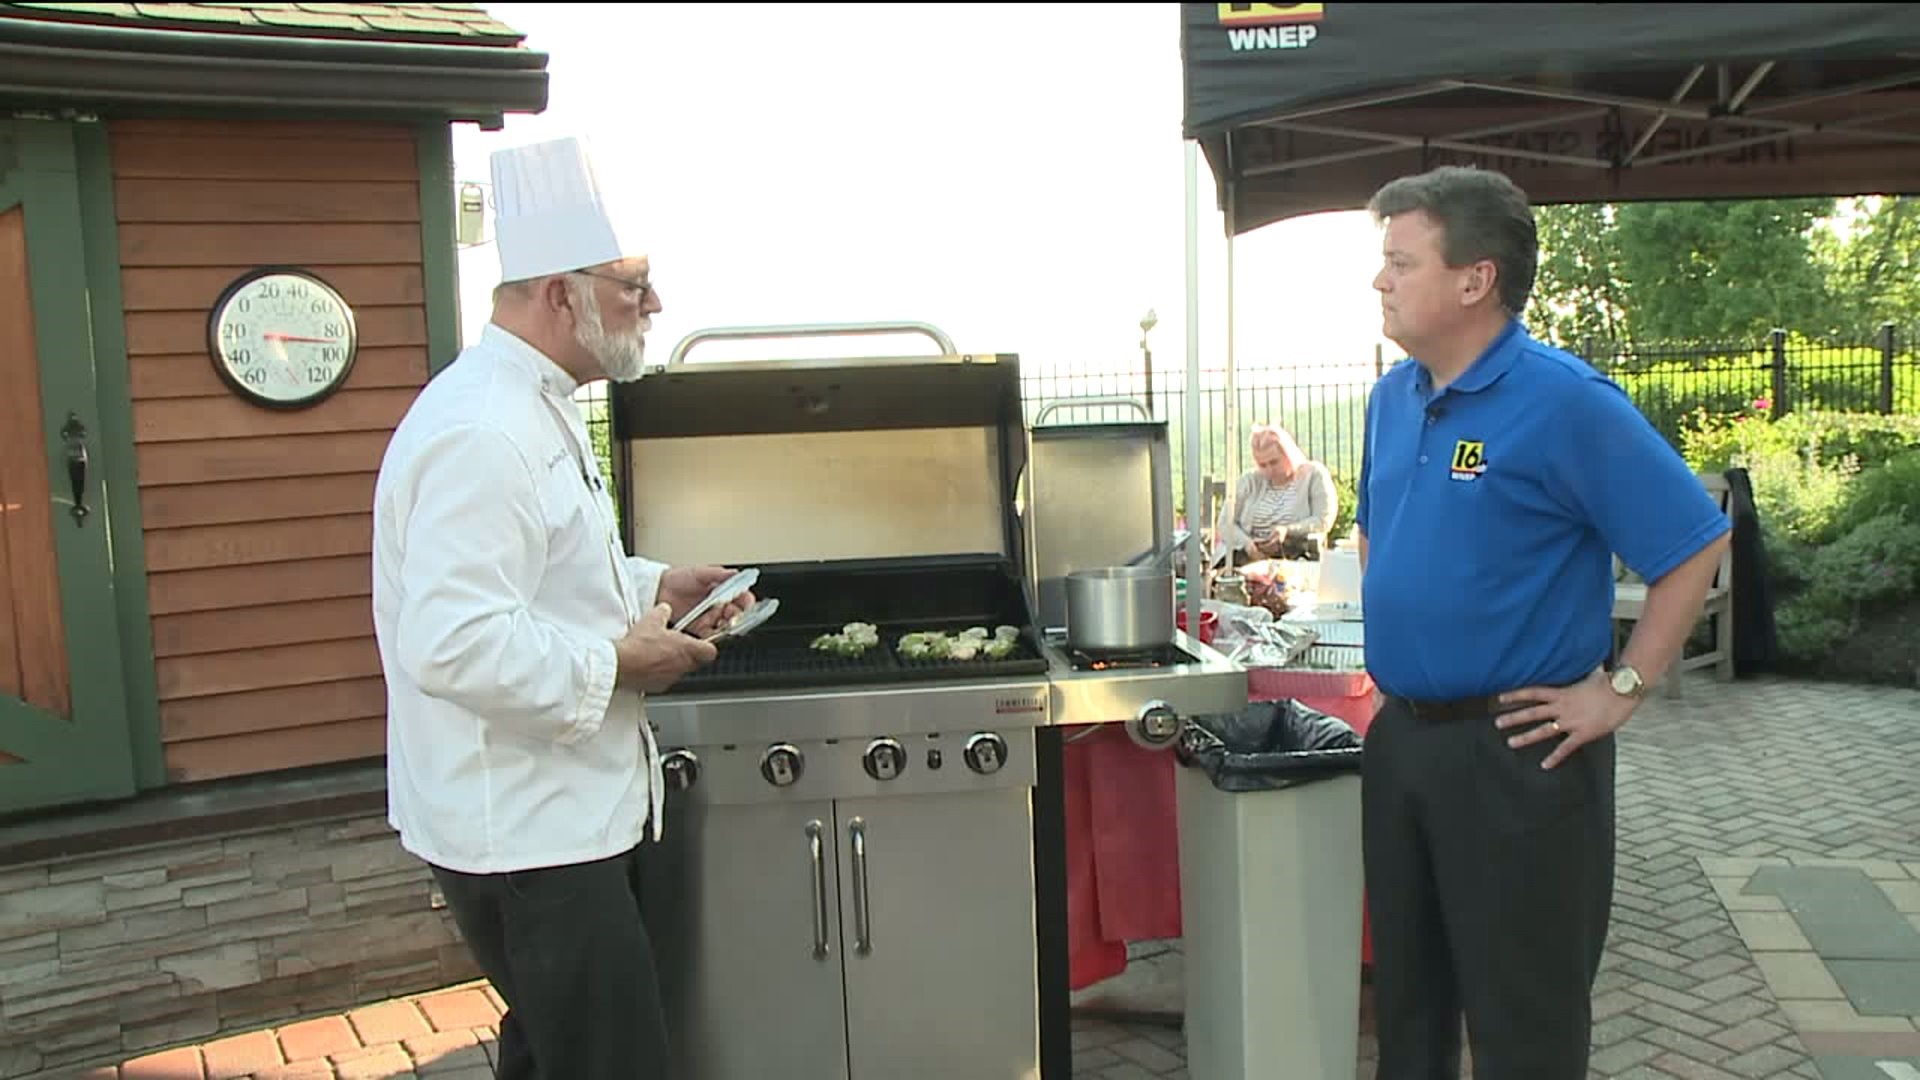 Chef Jake Gives Cooking Tips From the WNEP Backyard